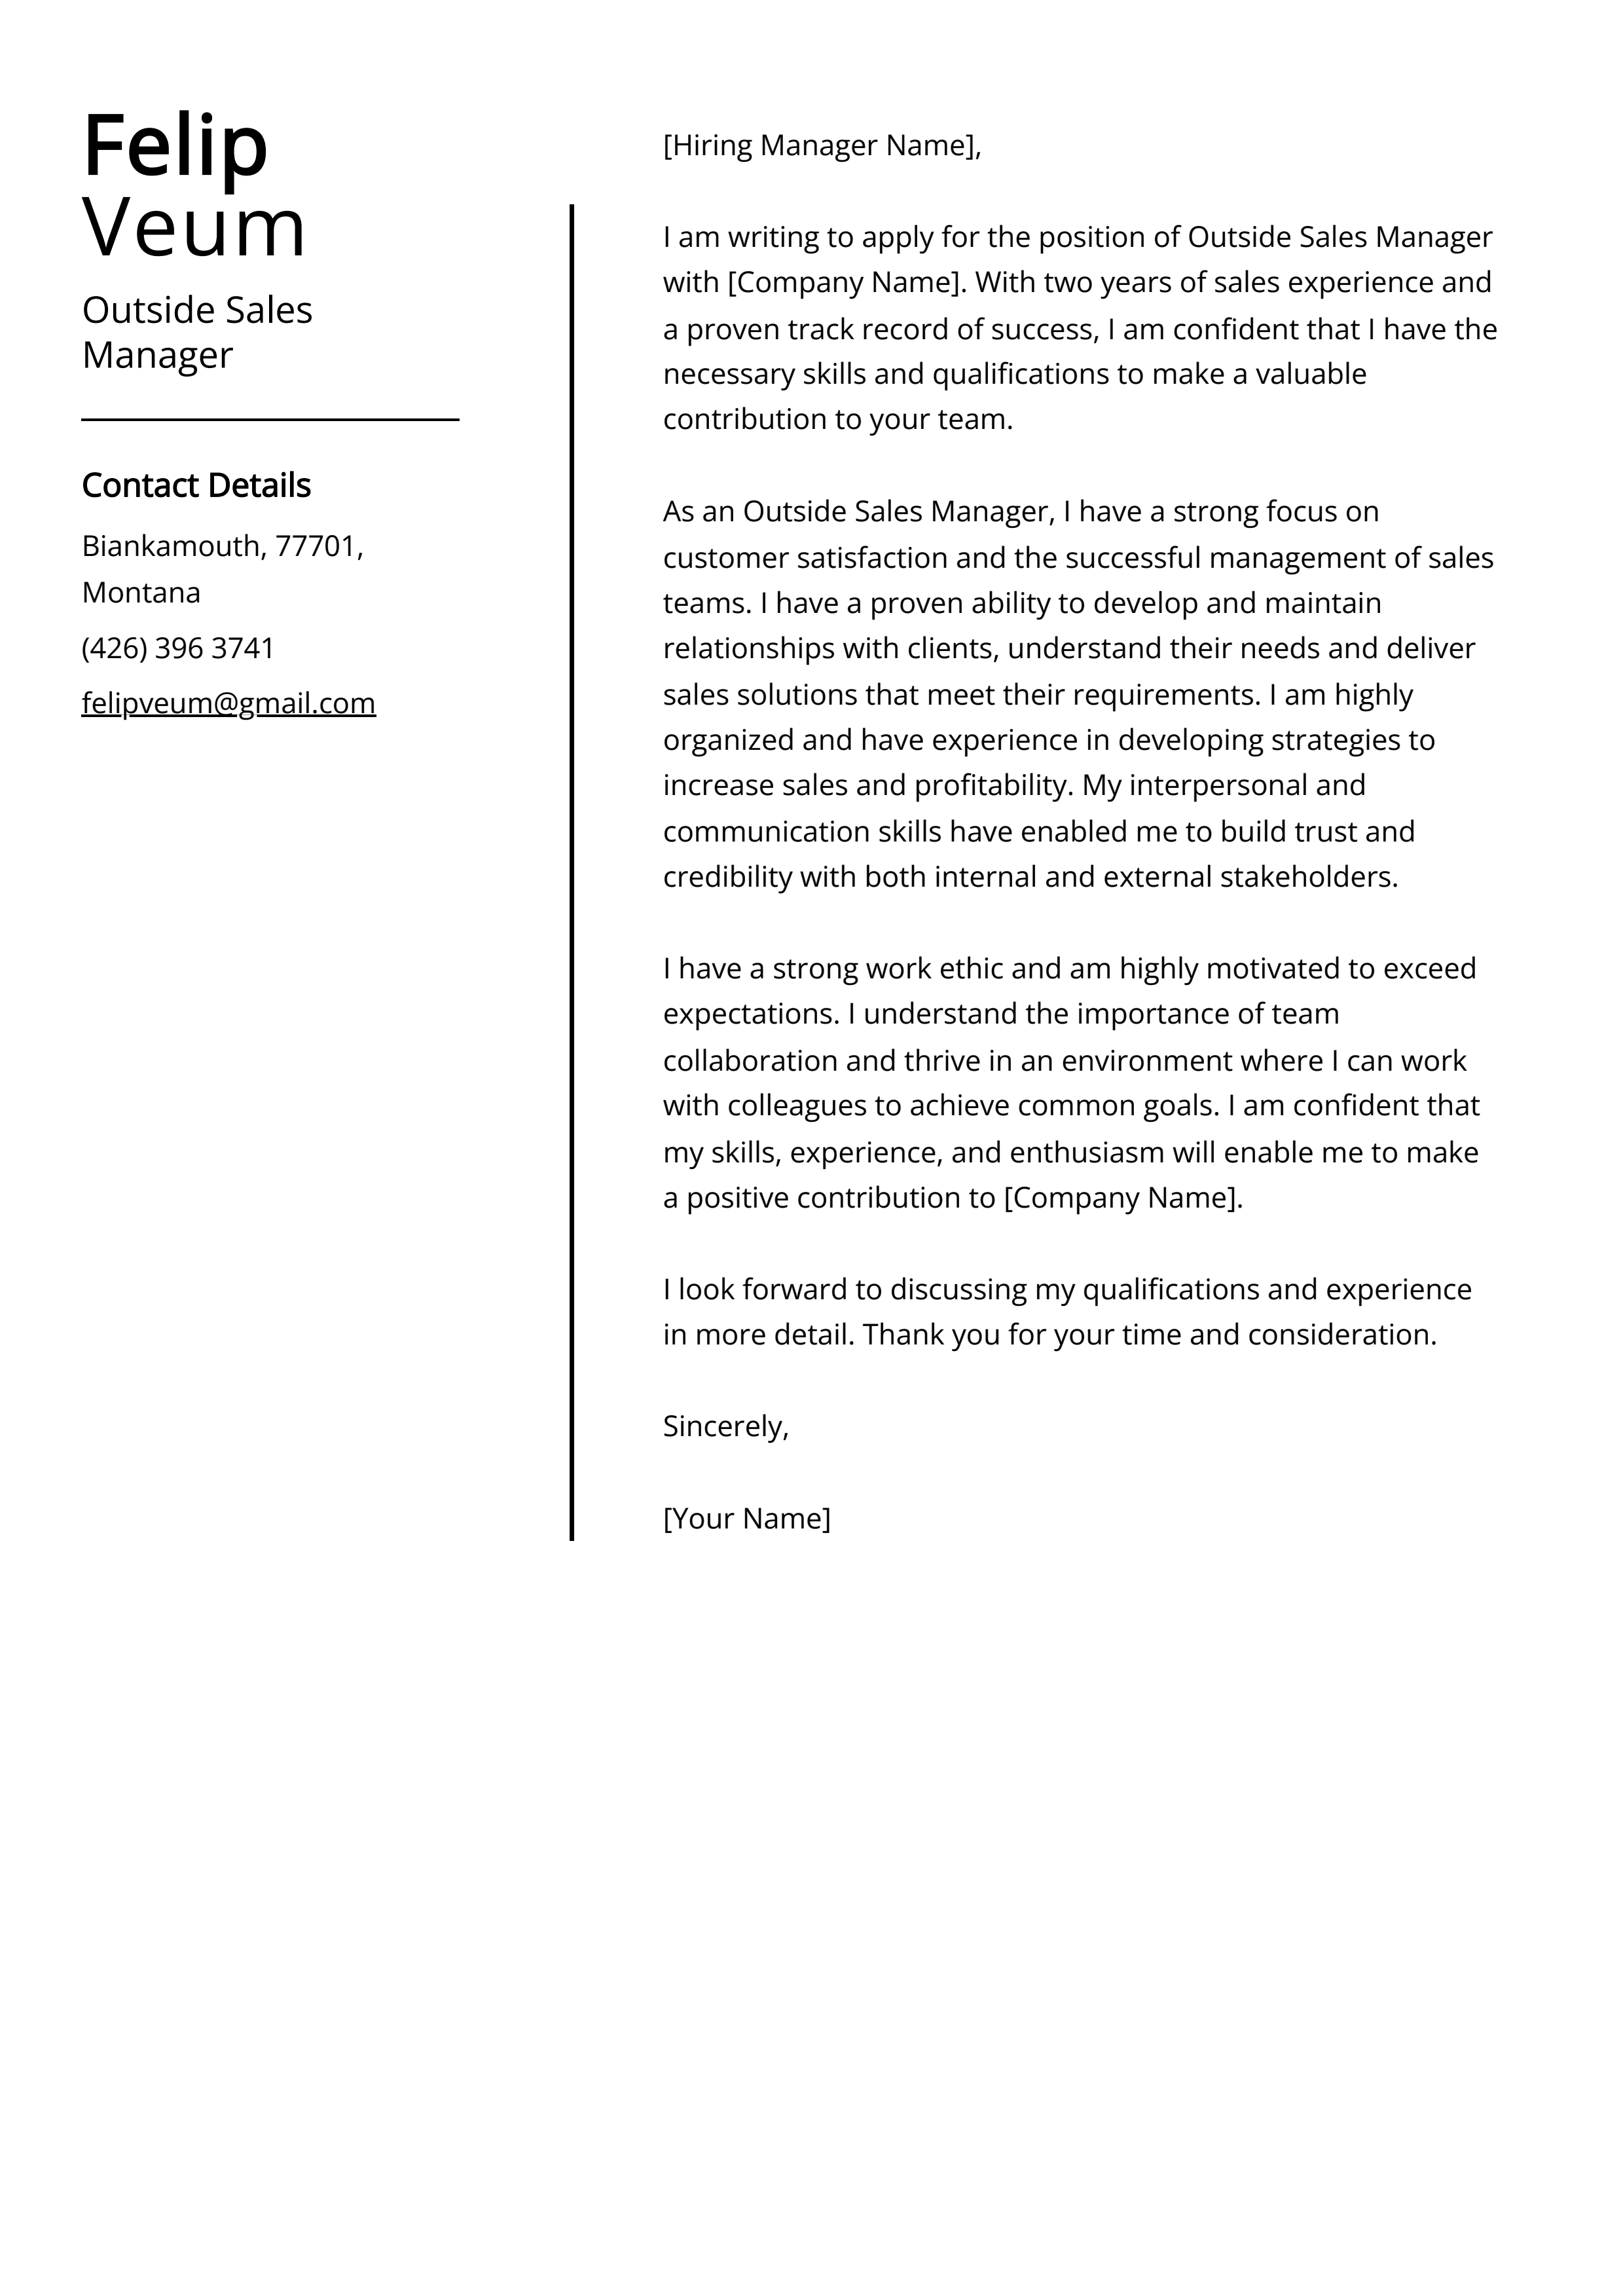 Outside Sales Manager Cover Letter Example